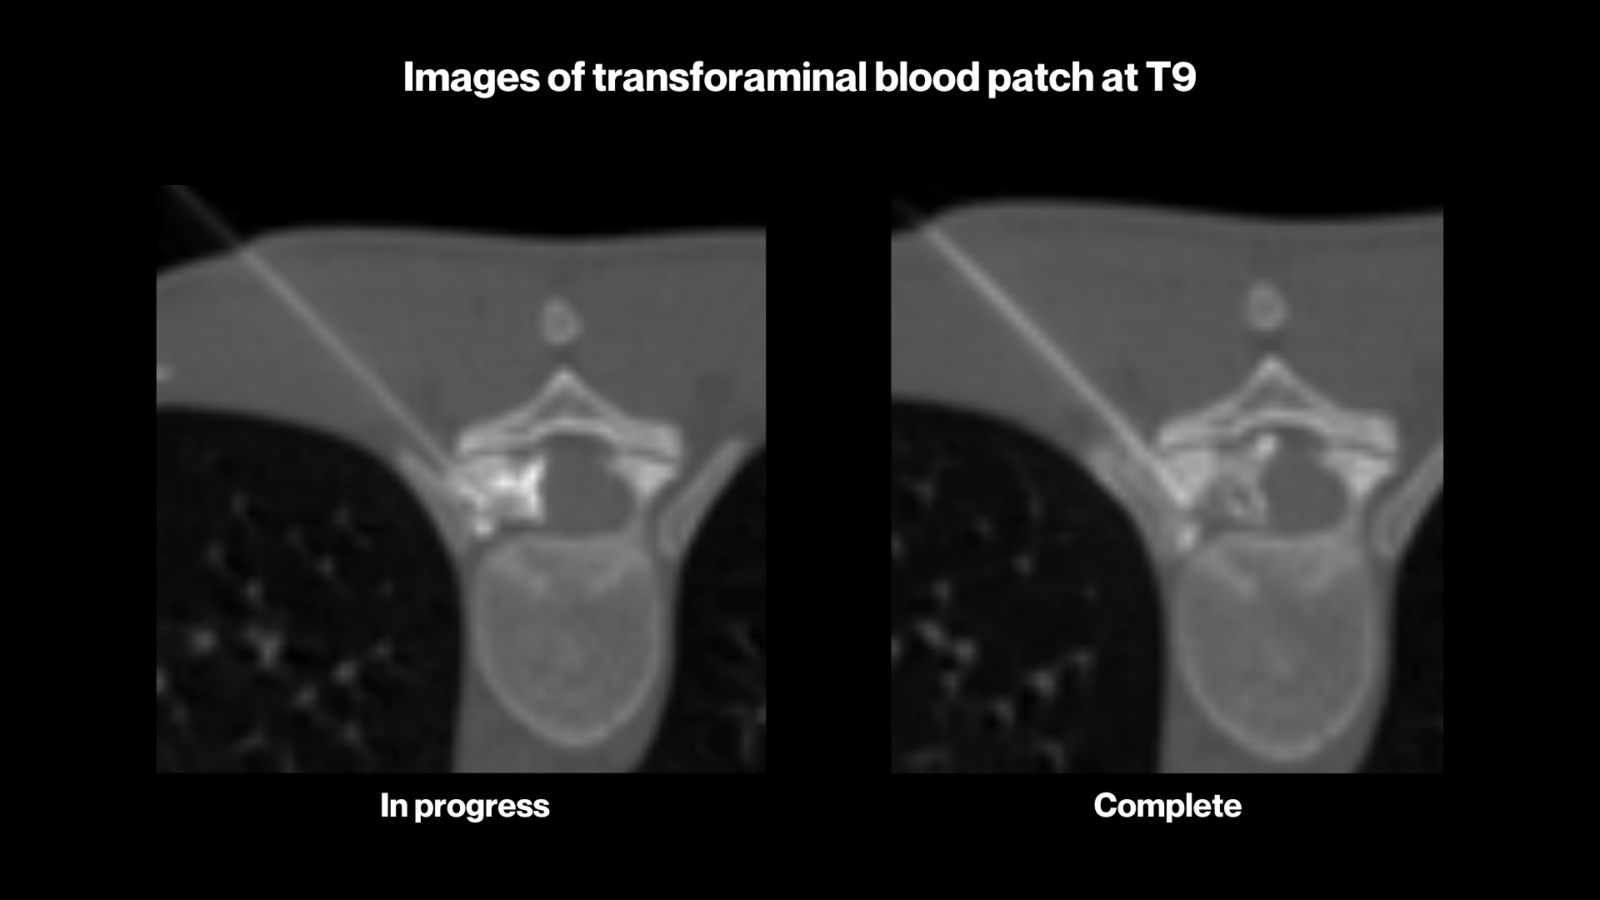 Hailey's story: A medical image showing the progress of her transforaminal blood patch at T9